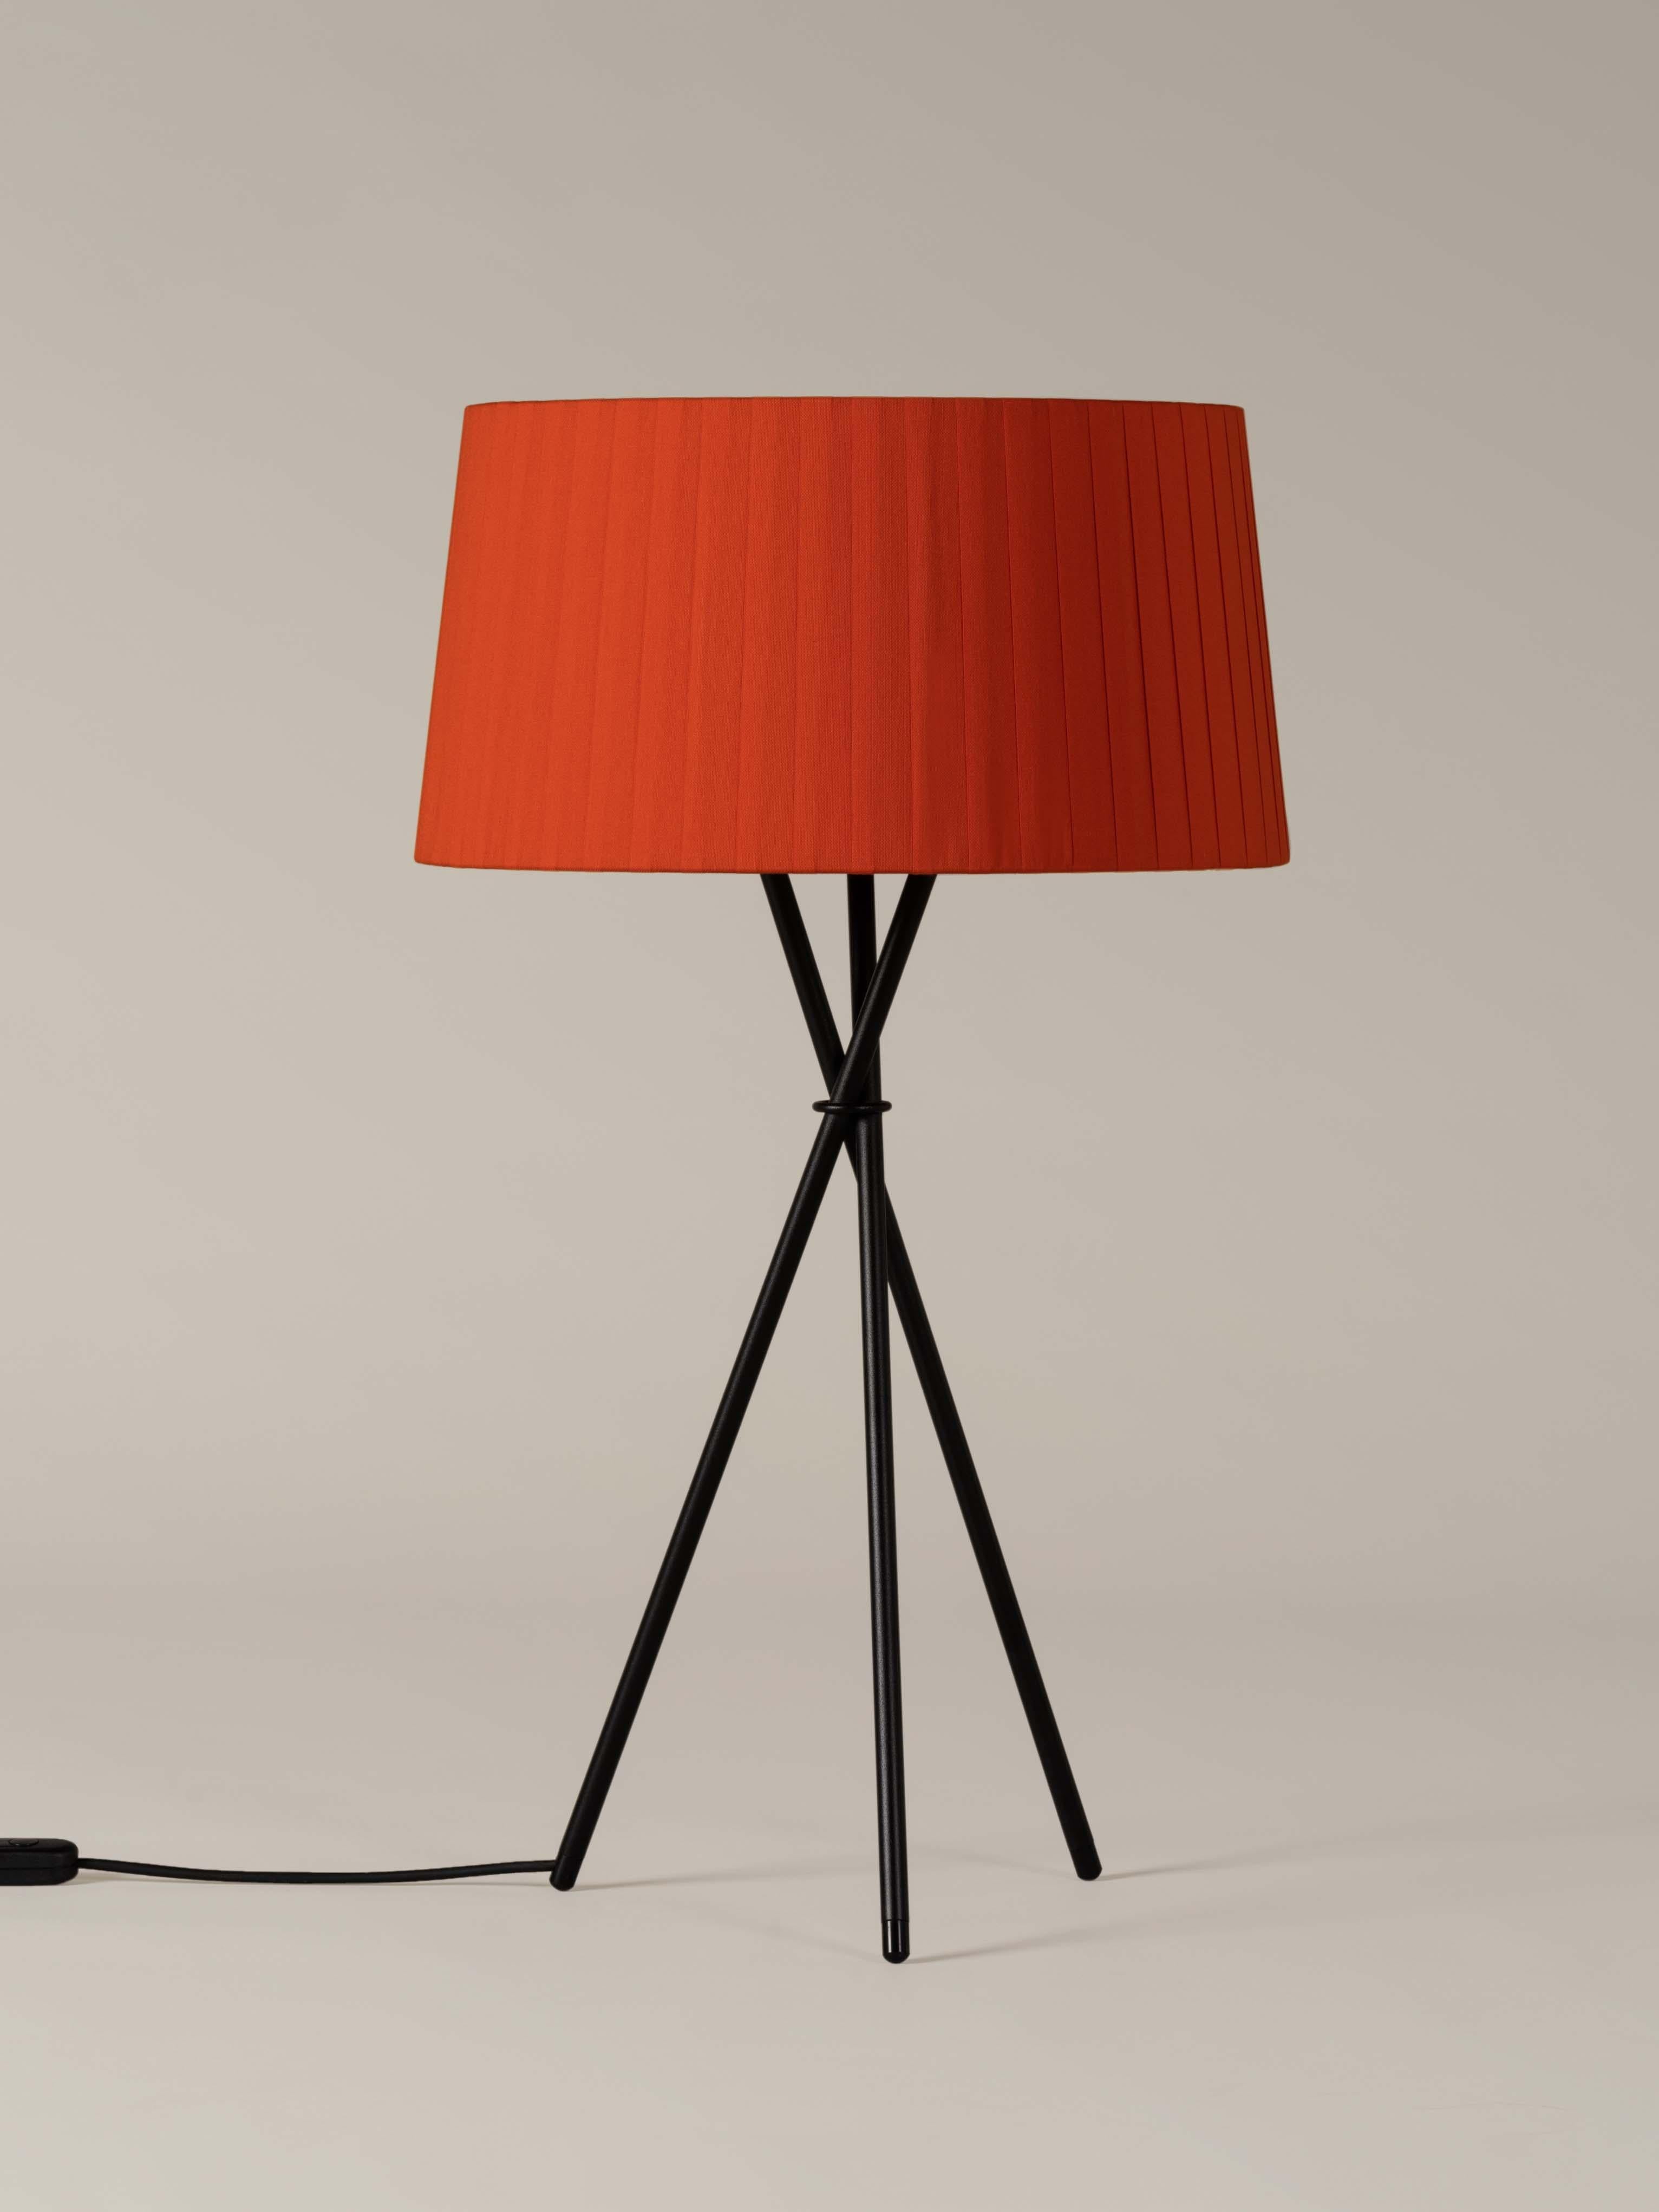 Red Trípode G6 table lamp by Santa & Cole
Dimensions: D 45 x H 75 cm
Materials: Metal, ribbon.
Available in other colors.

Trípode humanises neutral spaces with its colourful and functional sobriety. The shade is hand ribboned and its base